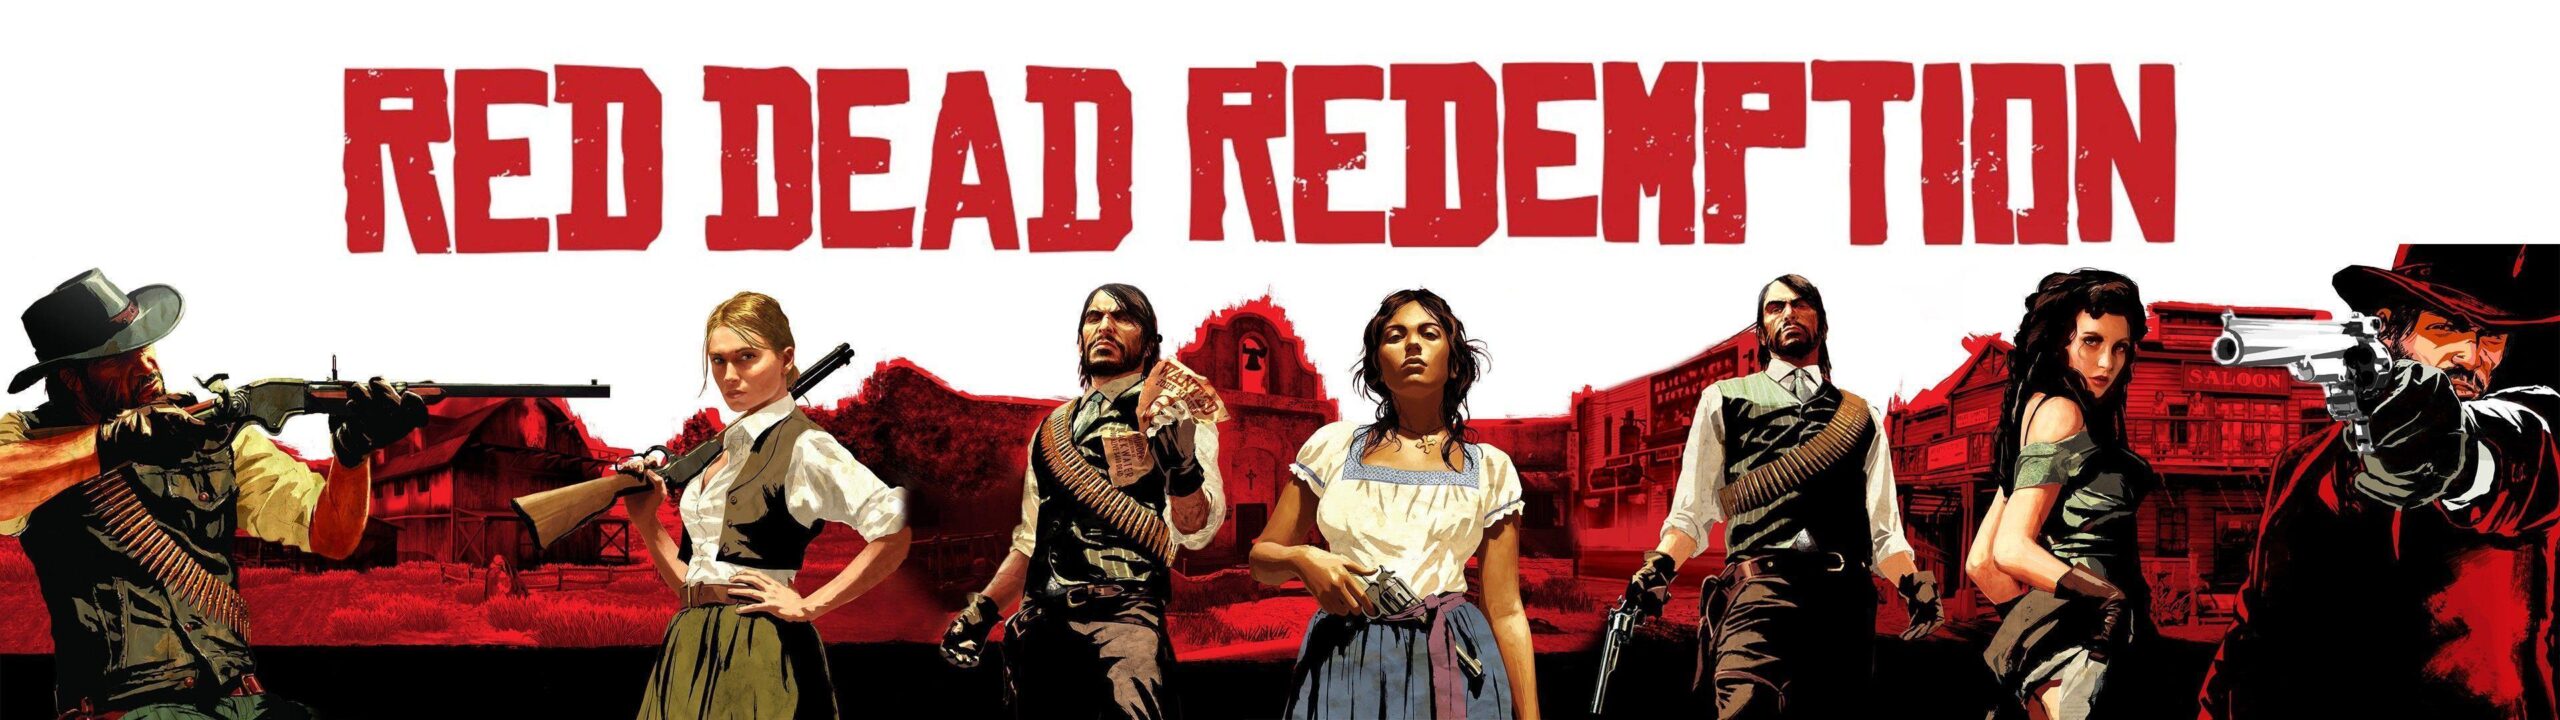 Red Dead Redemption Free 4K Wallpapers, Red Dead Redemption, Game